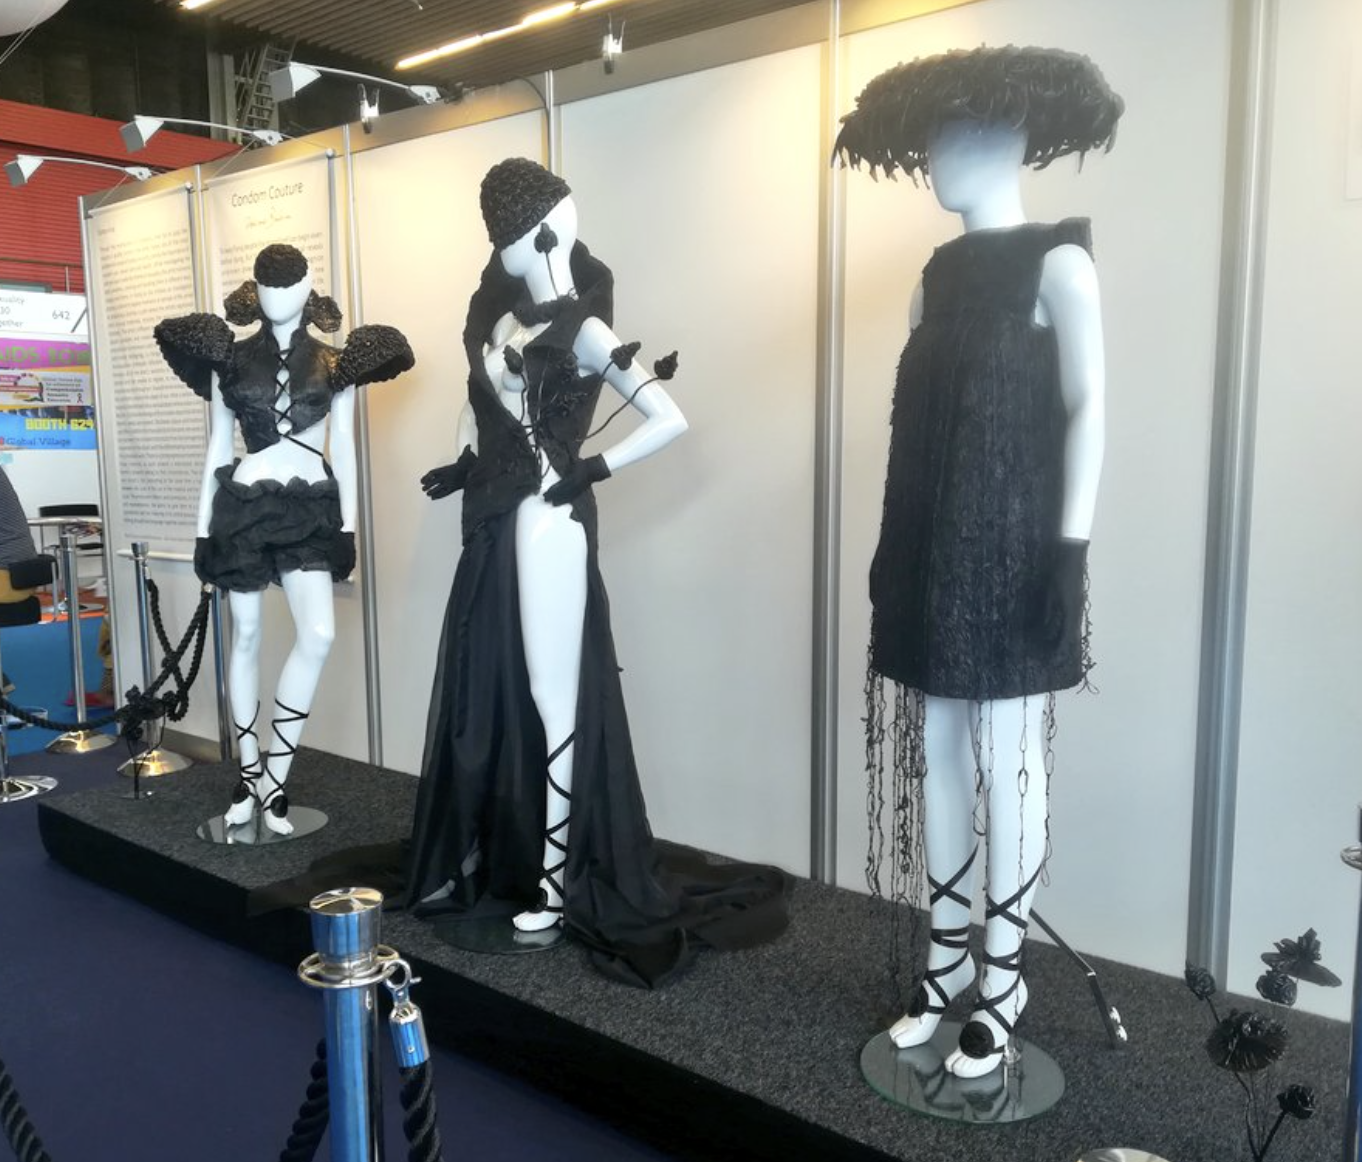 Mannequins wearing shorts, a minidress, and a gown, along with hats, made out of condoms